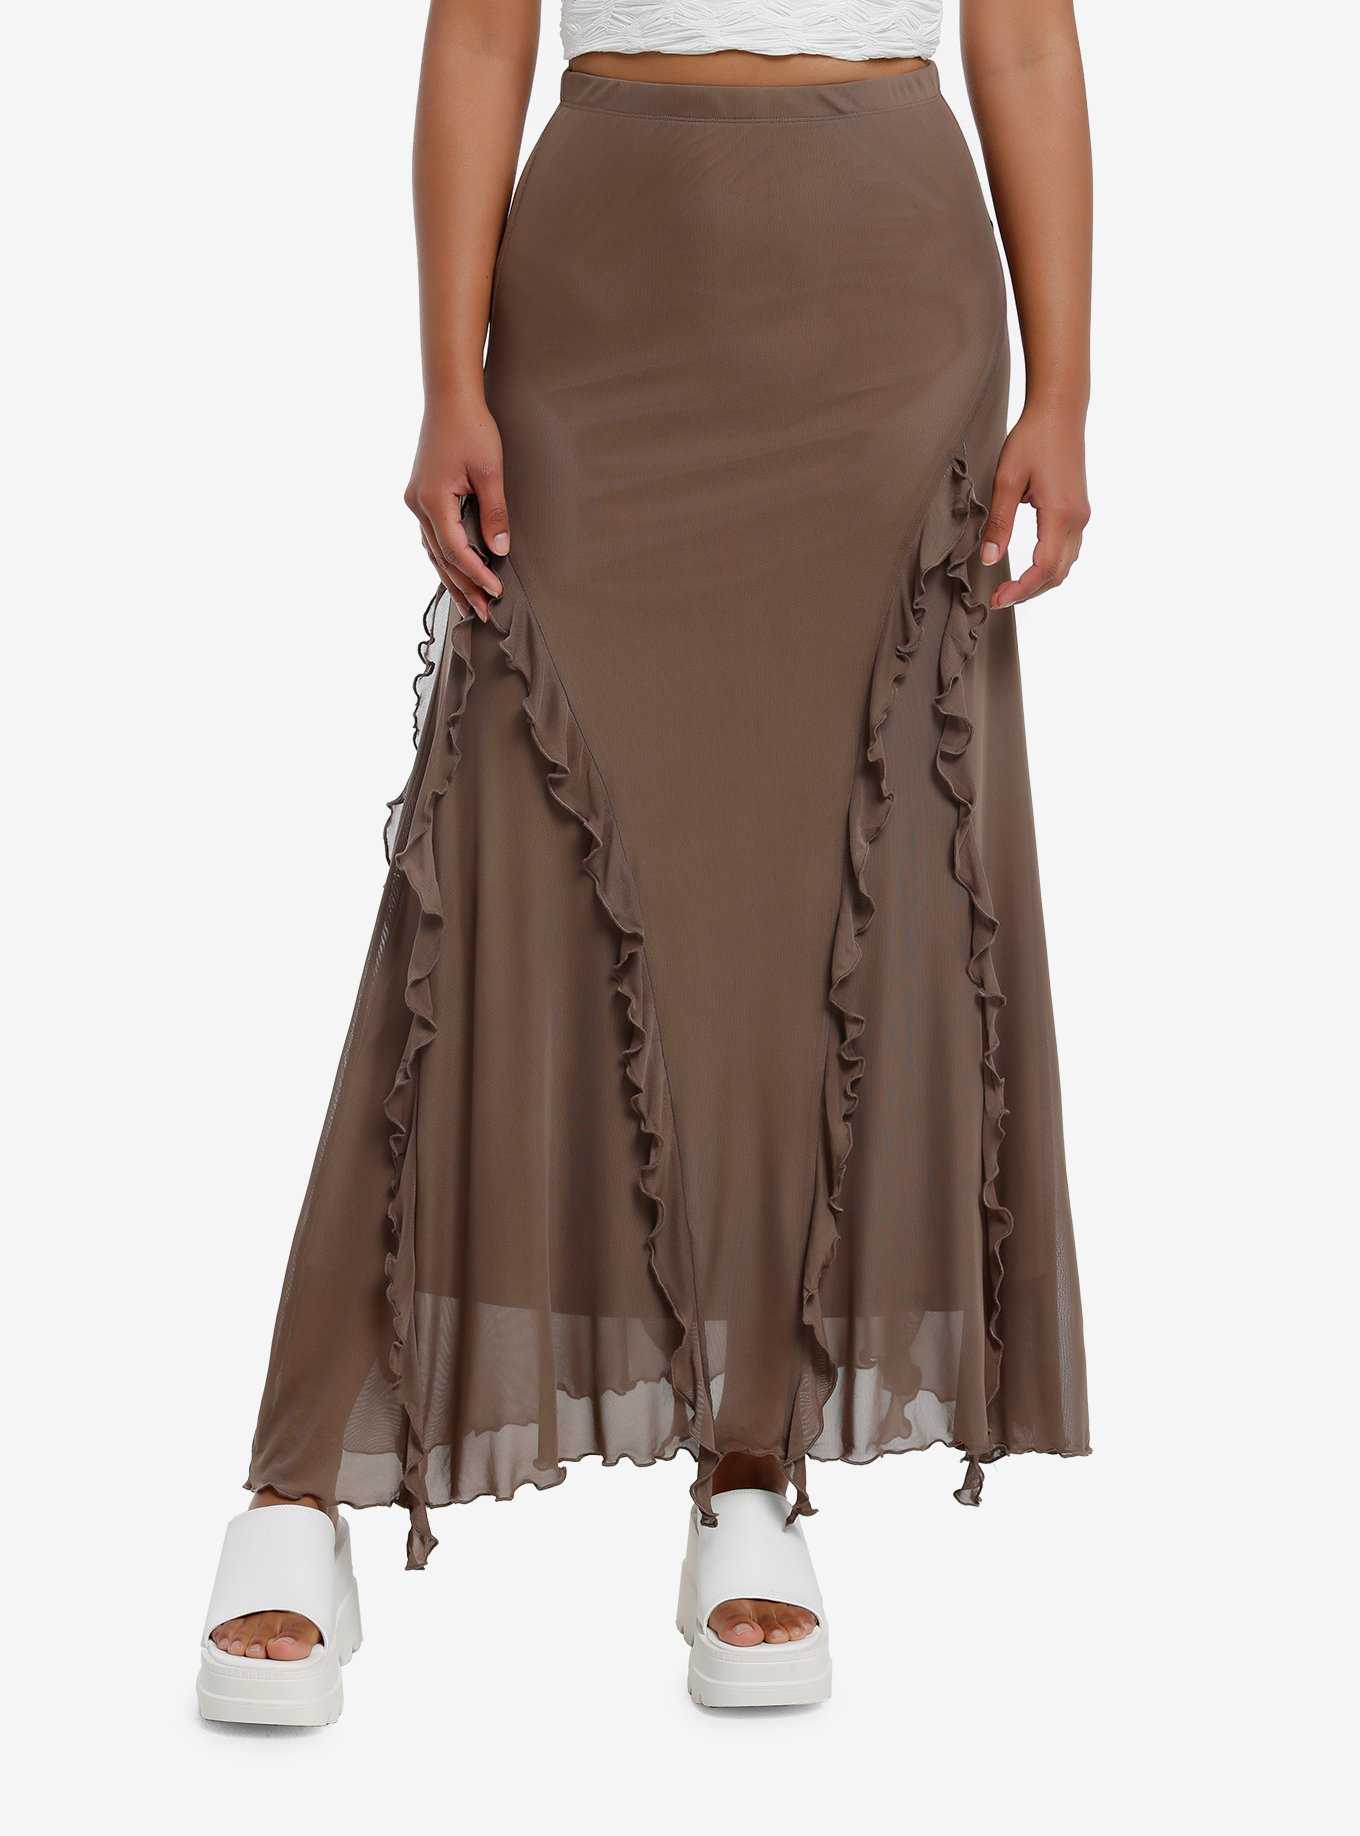 Thorn & Fable Brown Ruffle Maxi Skirt, , hi-res